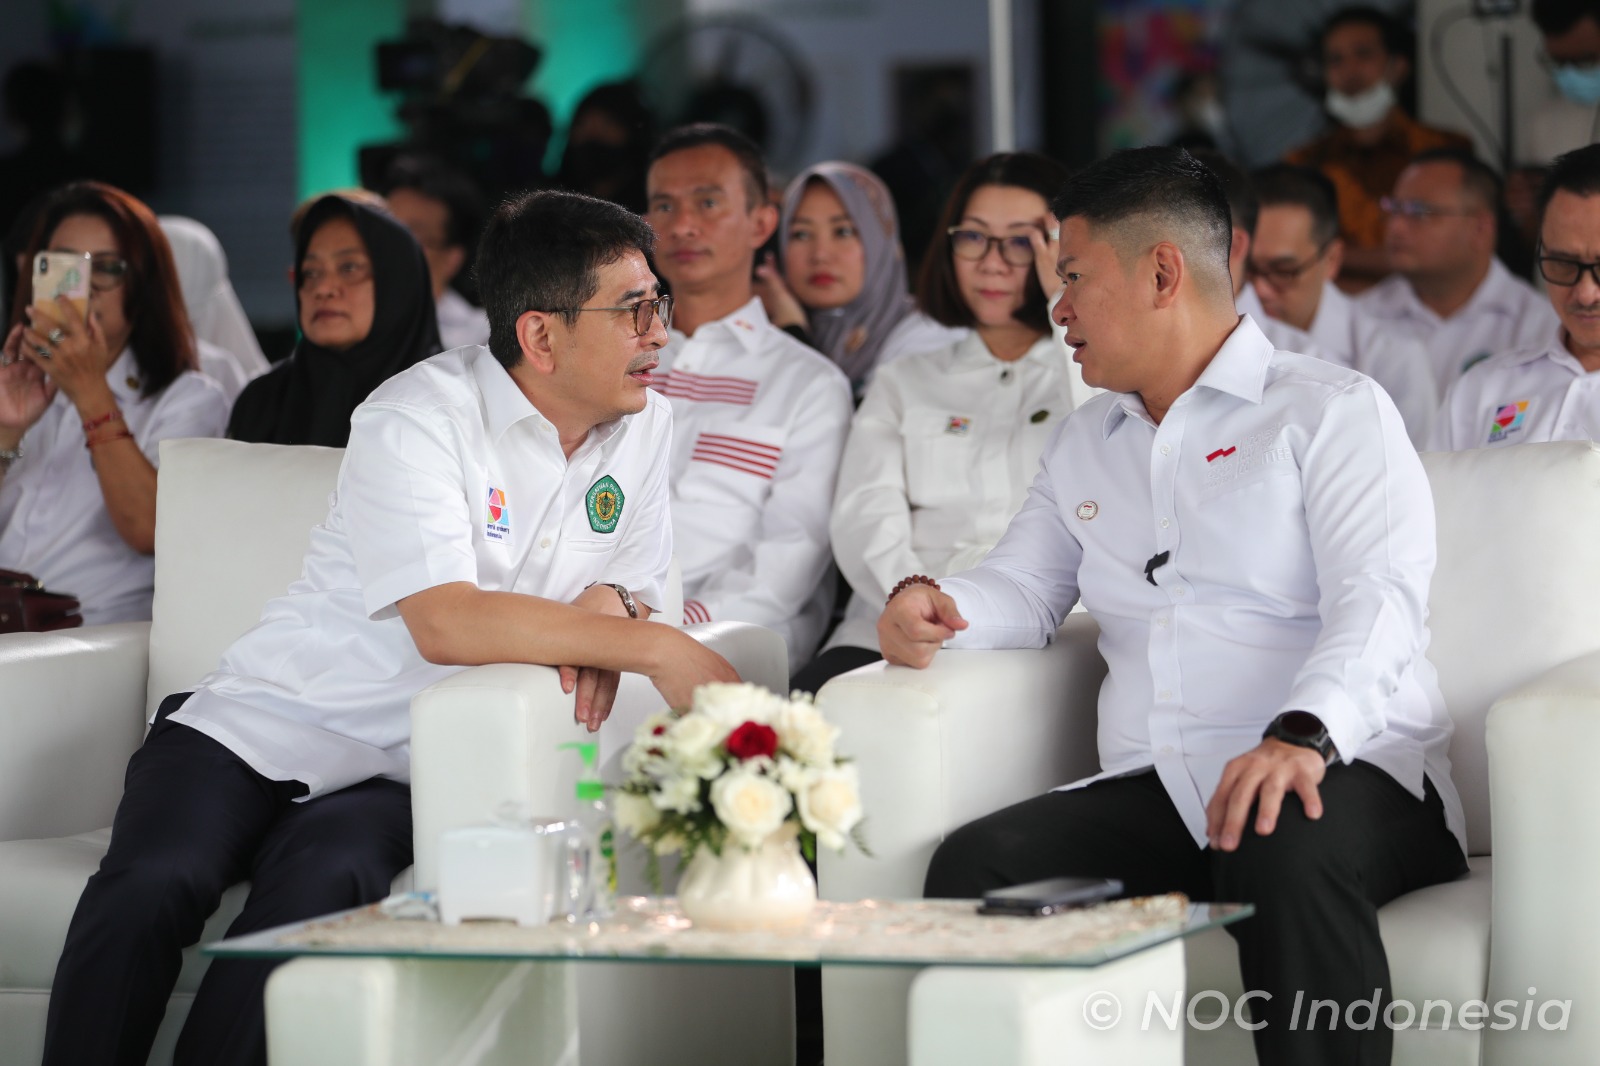 Indonesia Olympic Commitee - Paris 2024 Tickets Up For Grabs As New Perpani Chief Takes Role